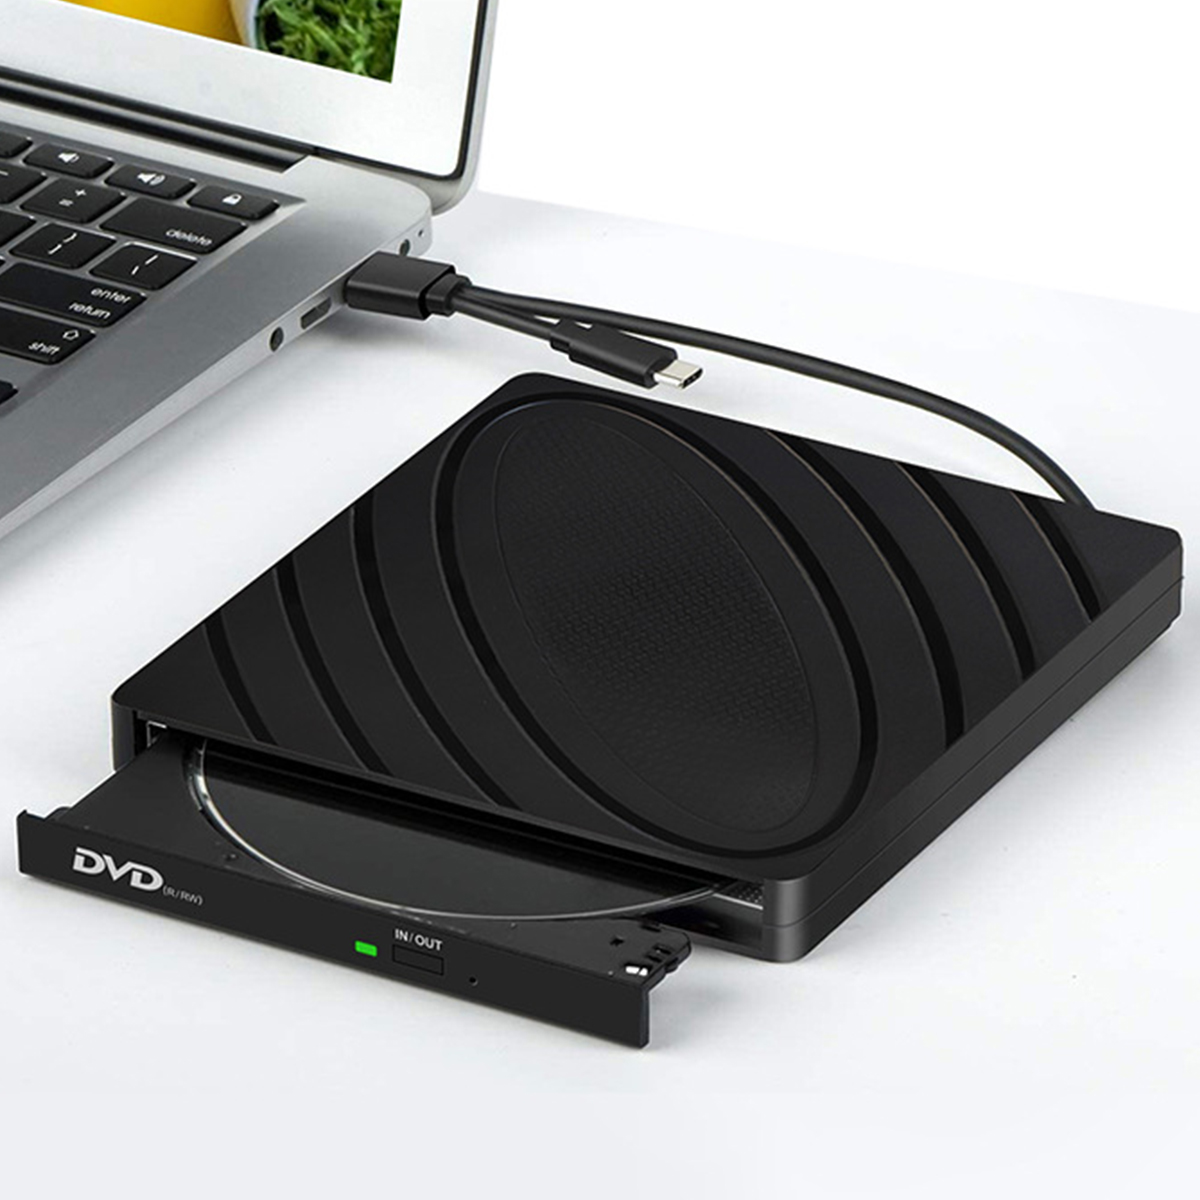 Find USB3 0 Type C External CD DVD Optical Drive High Speed Data Transfer External DVD RW Player External Burner Writer Rewriter for Computer PC Laptop XD0065 for Sale on Gipsybee.com with cryptocurrencies